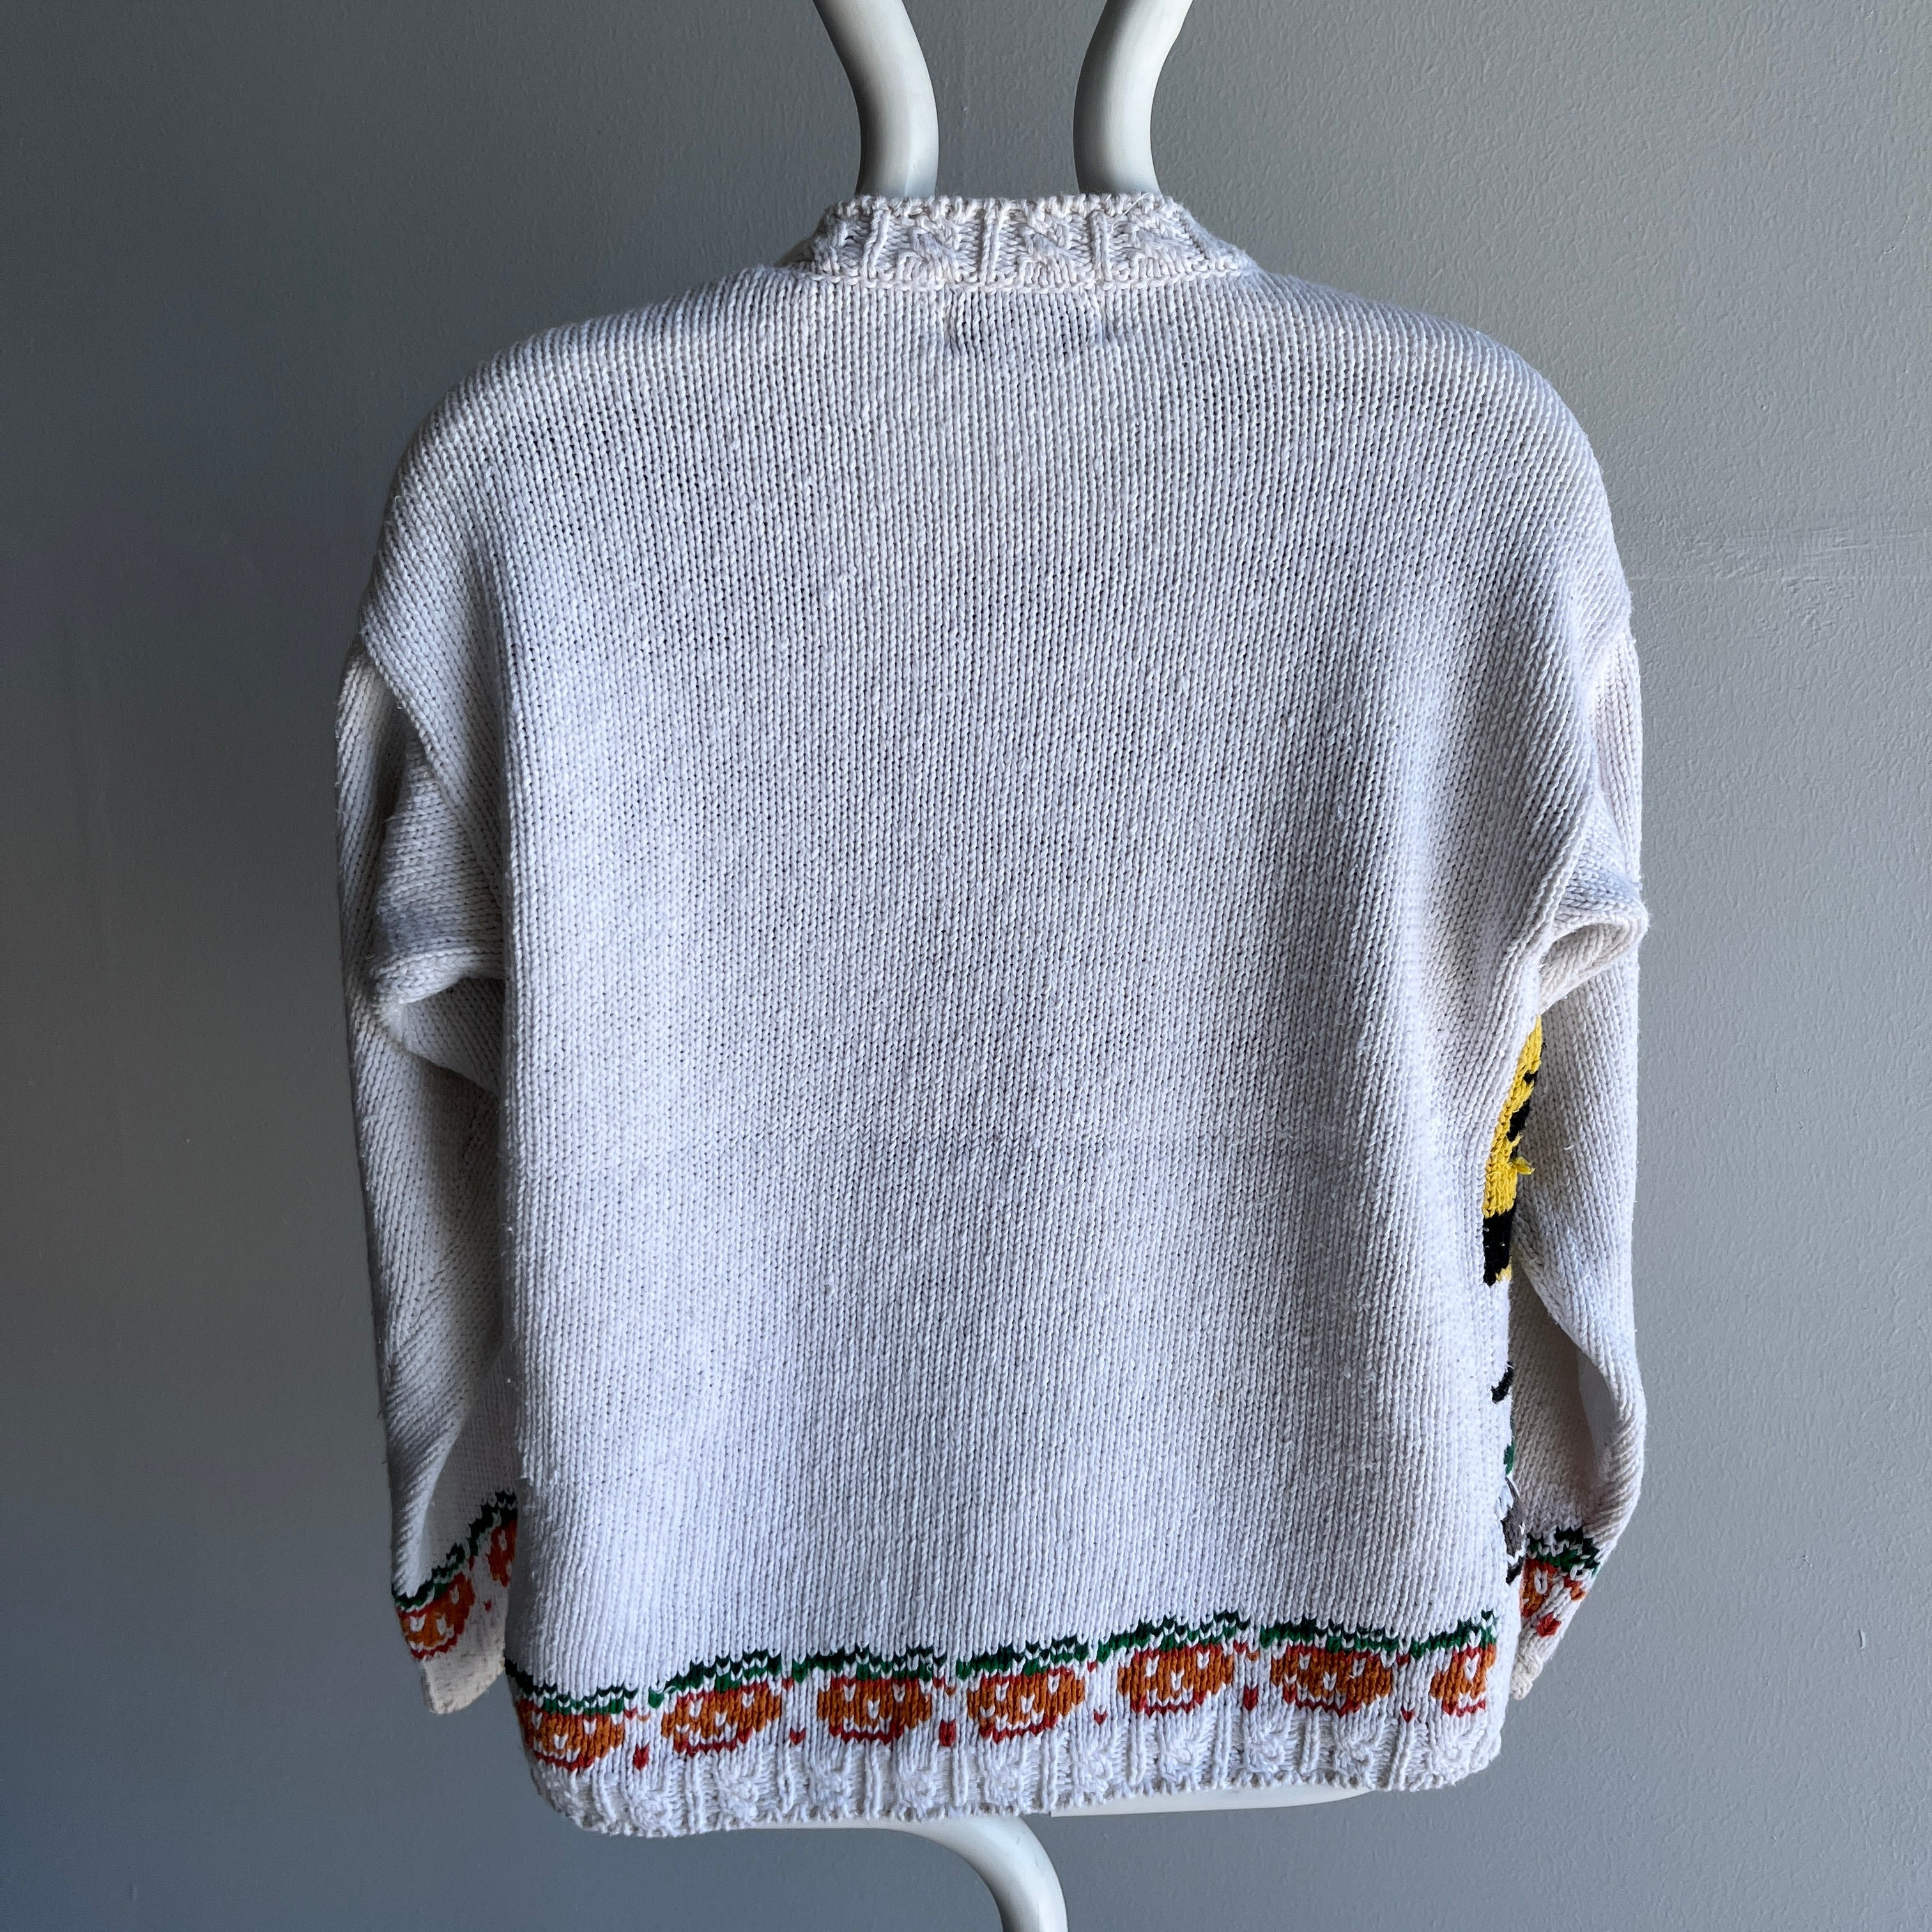 1990s Fall Feels Cotton Knit Sweater - Petite S/M